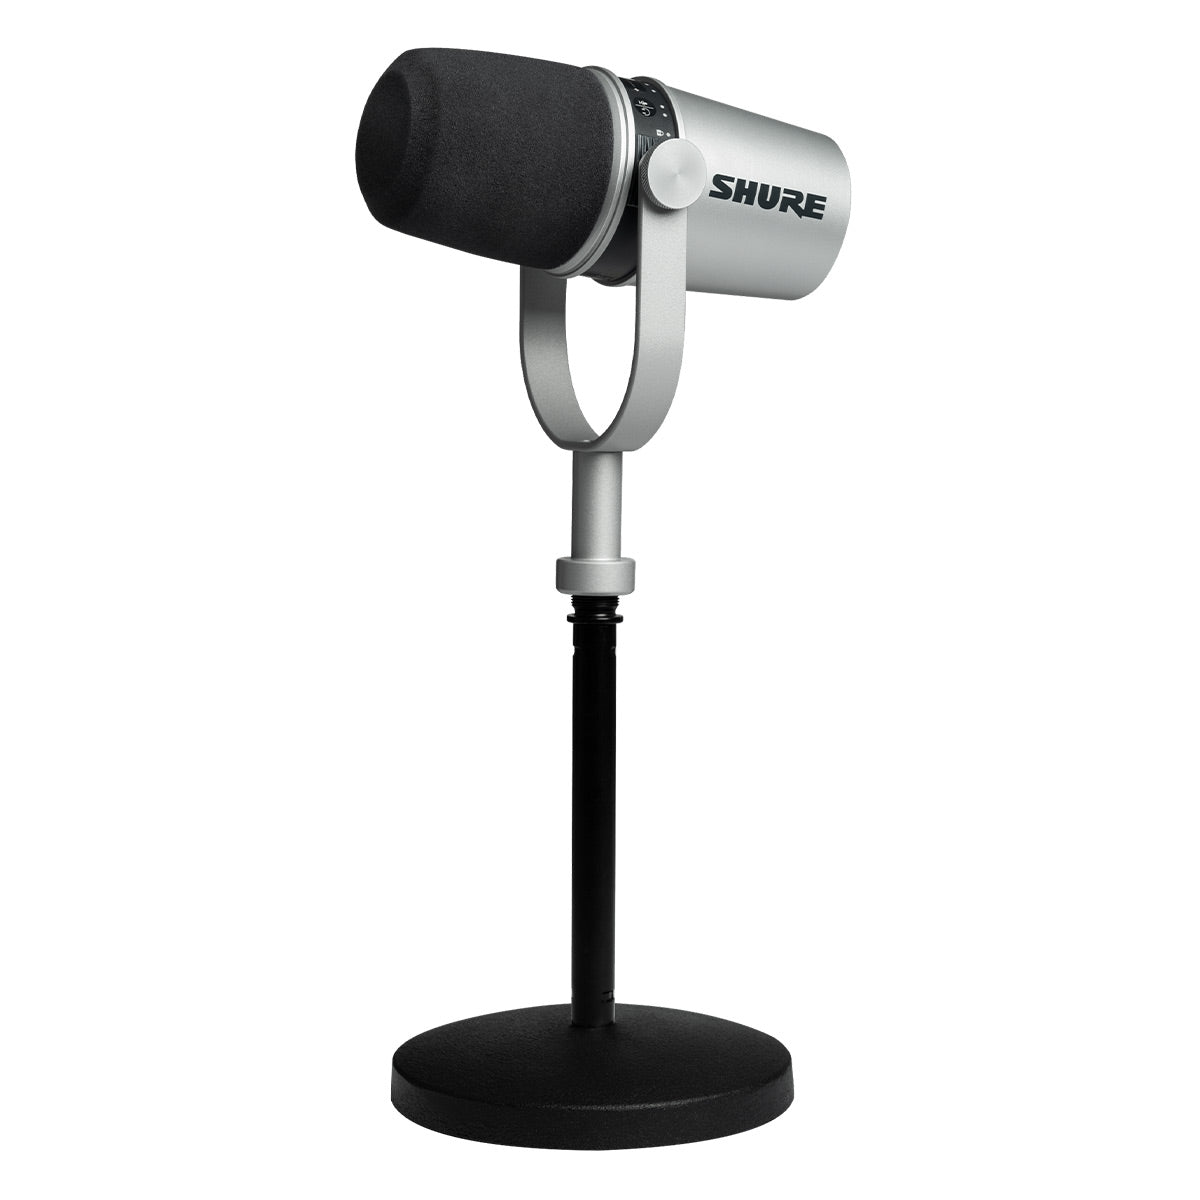 Shure MV7 USB/XLR Dynamic Microphone for Podcasting, Recording, Live Streaming & Gaming with Built-in Headphone Output (Silver)